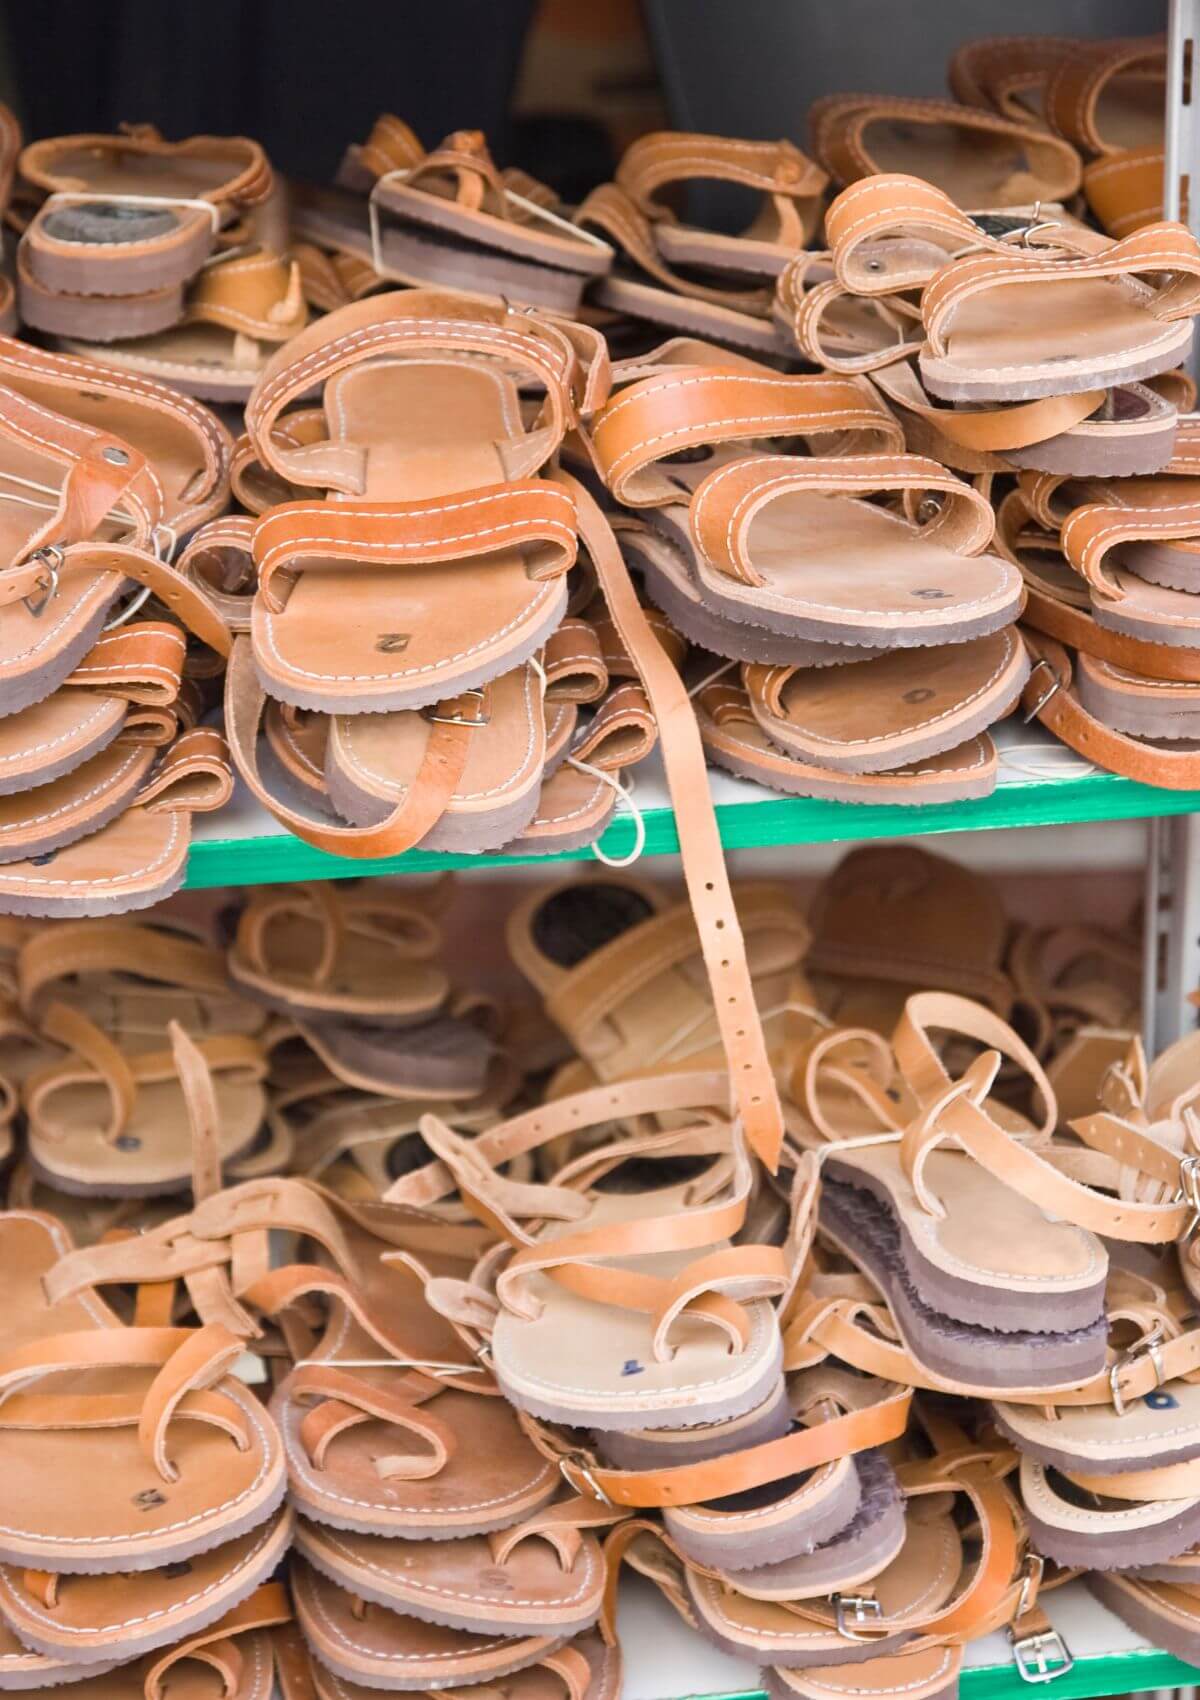 Leather sandals on display at Greece souvenir stores